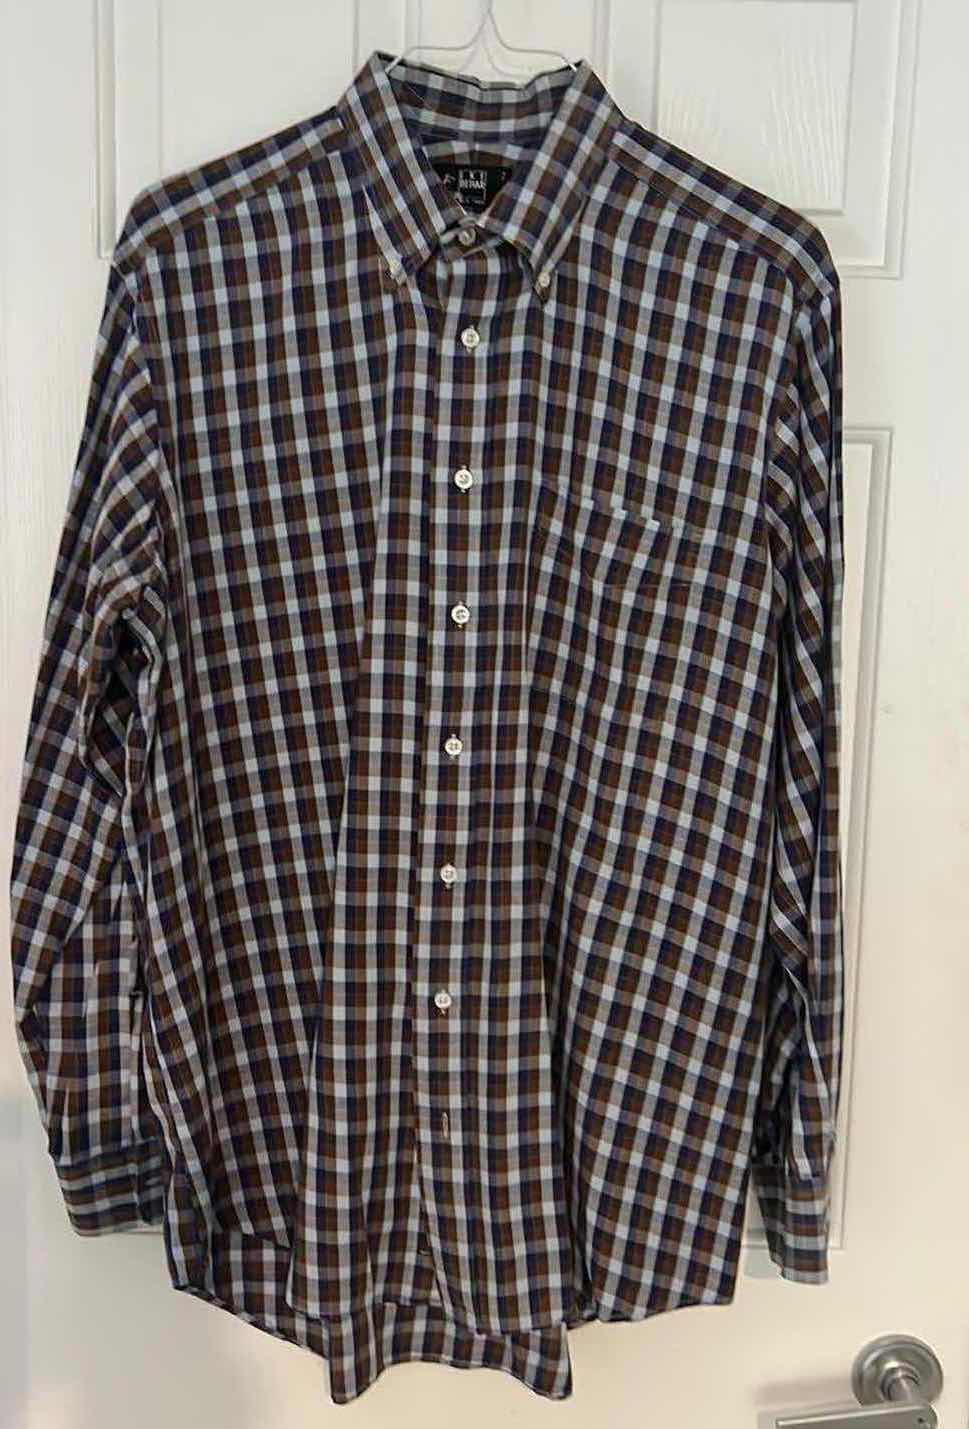 Photo 1 of MENS CLOTHING- IKE BEHAR NEW YORK 100% COTTON COLLARED BUTTON DOWN SHIRT SIZE 17-36